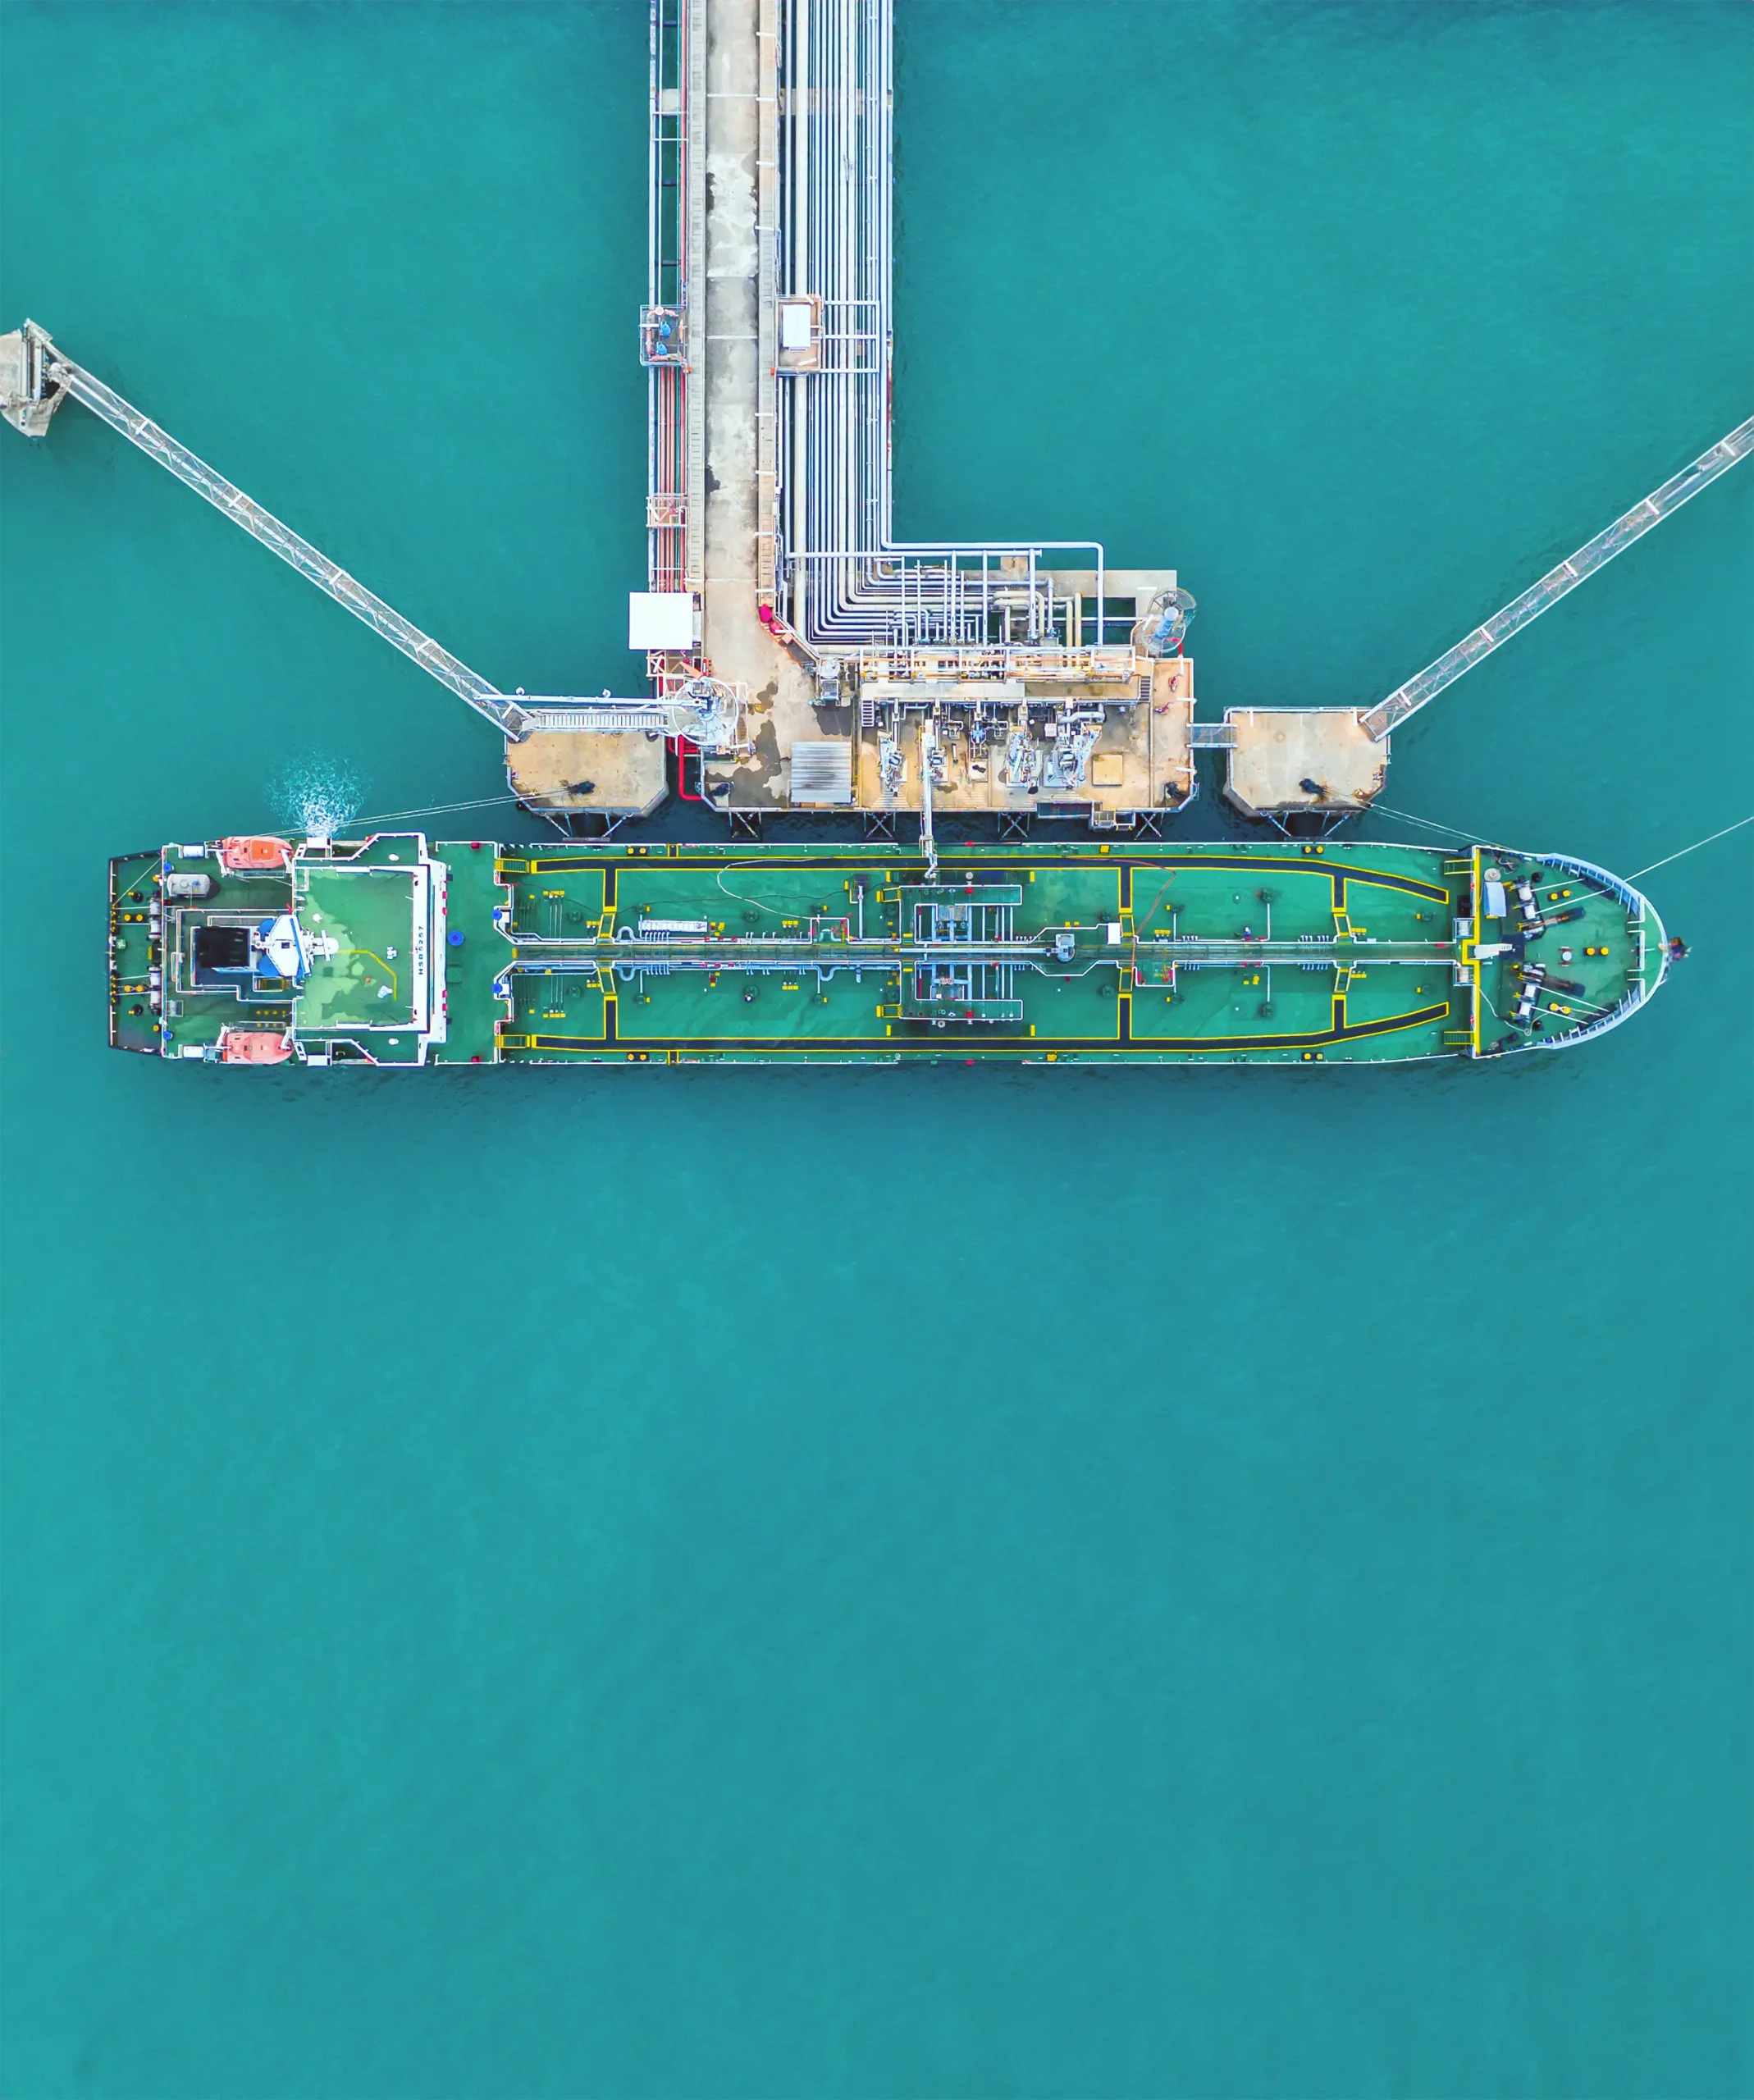 Aerial view of a large LNG transporter boat, designed for the transportation of liquefied natural gas.